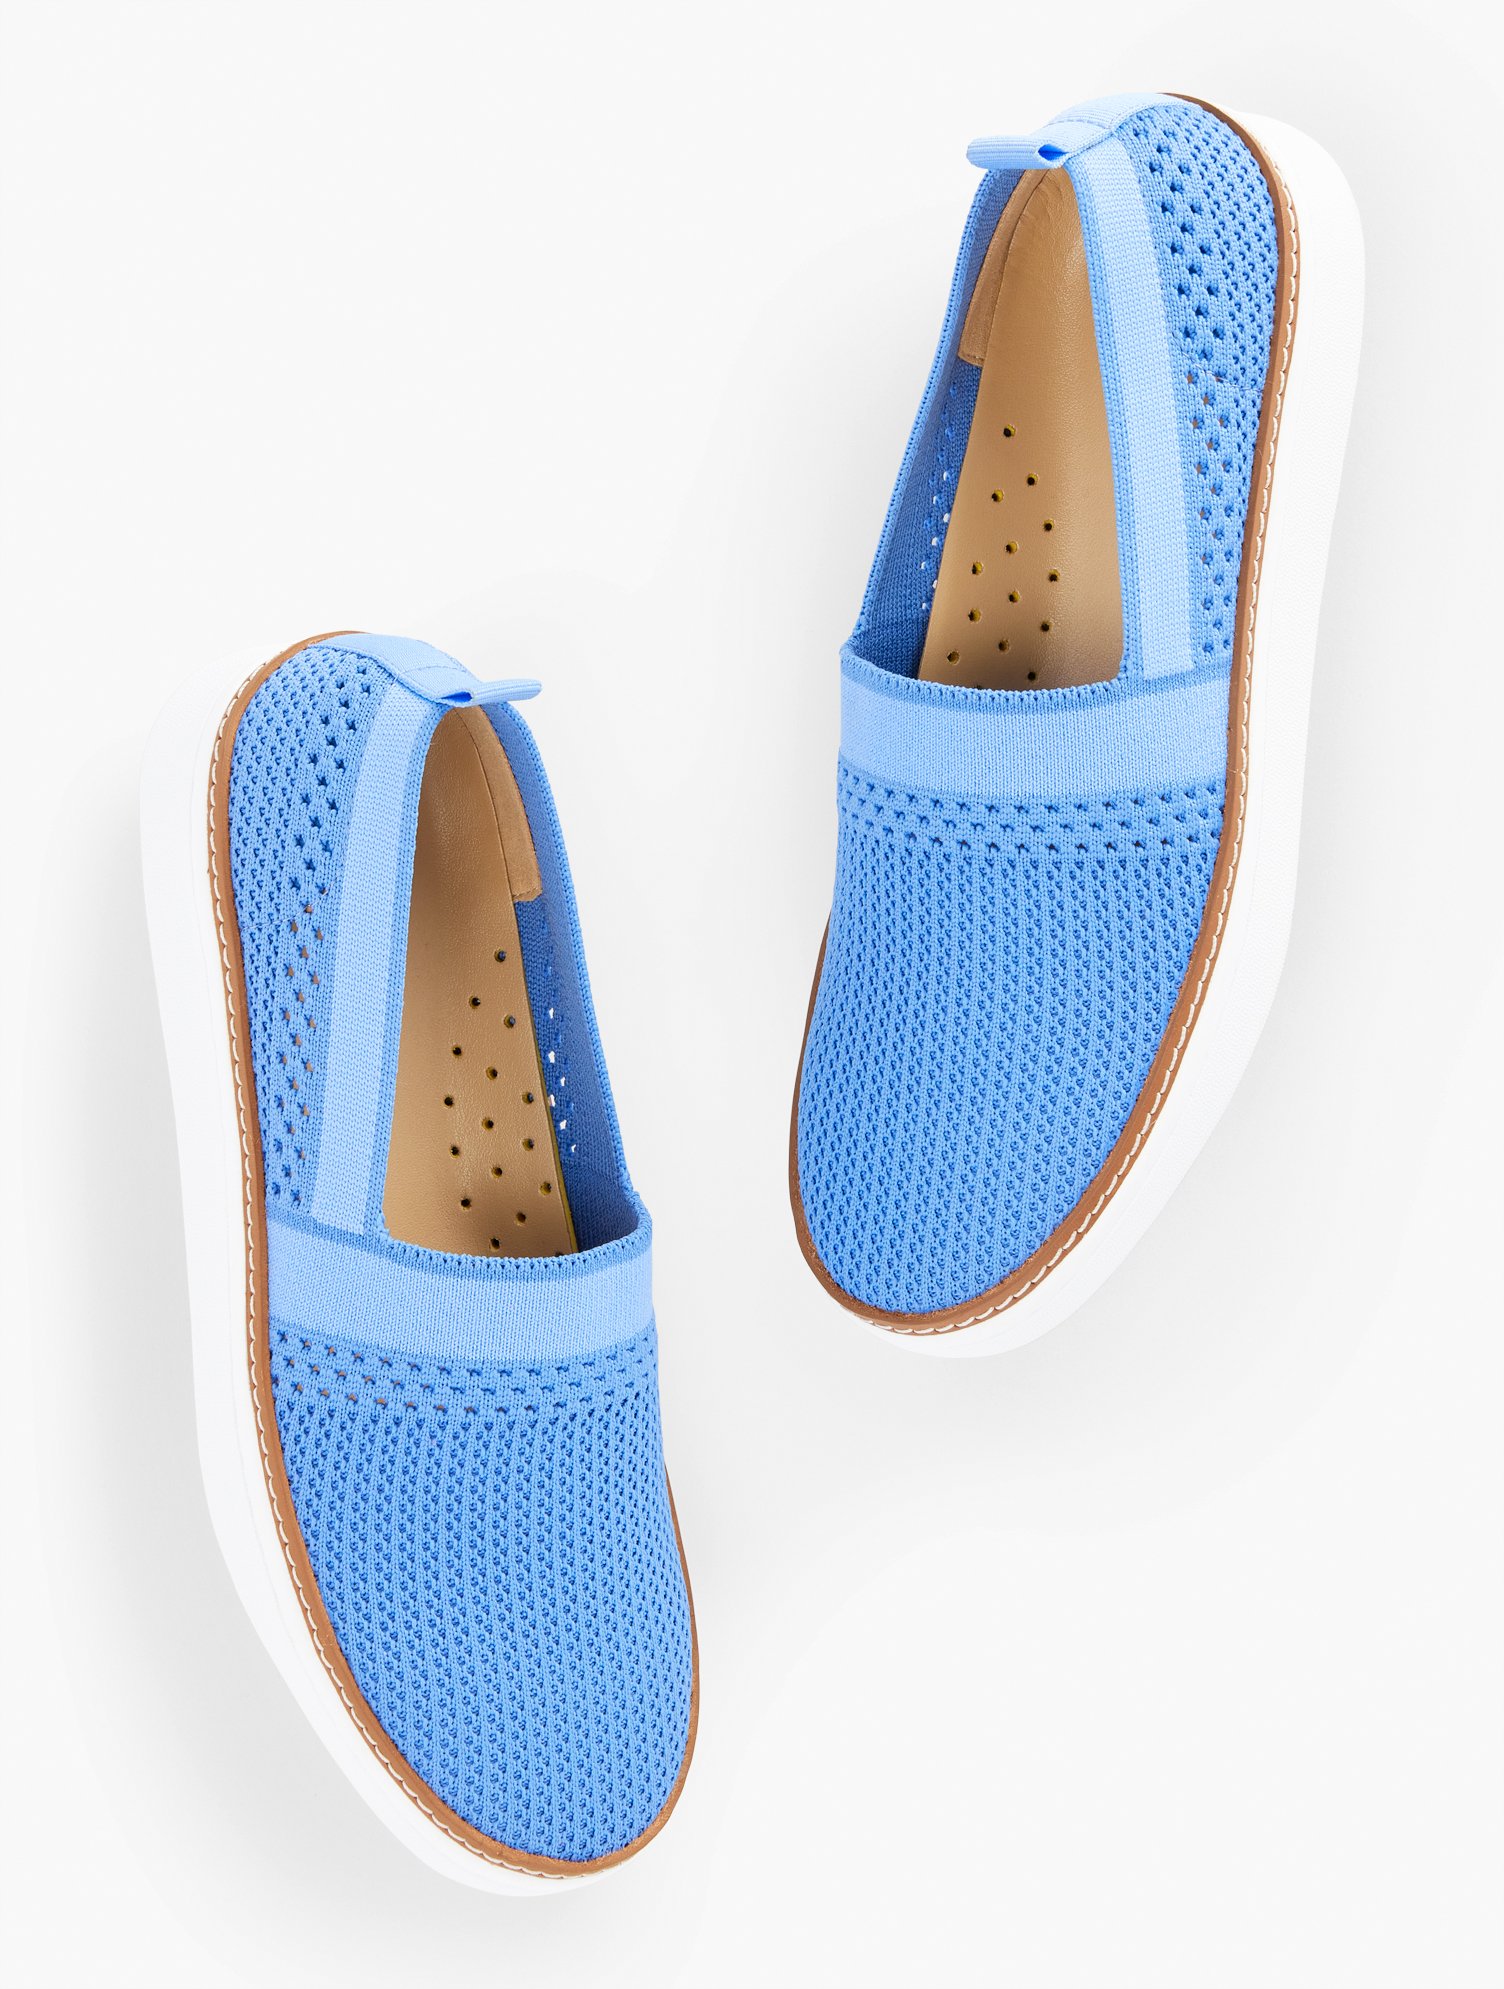 Talbots Brittany Knit Slip-on Sneakers - Blue Iris/blue Sky - 7 1/2 M - 100% Cotton  In Blue Iris,blue Sky